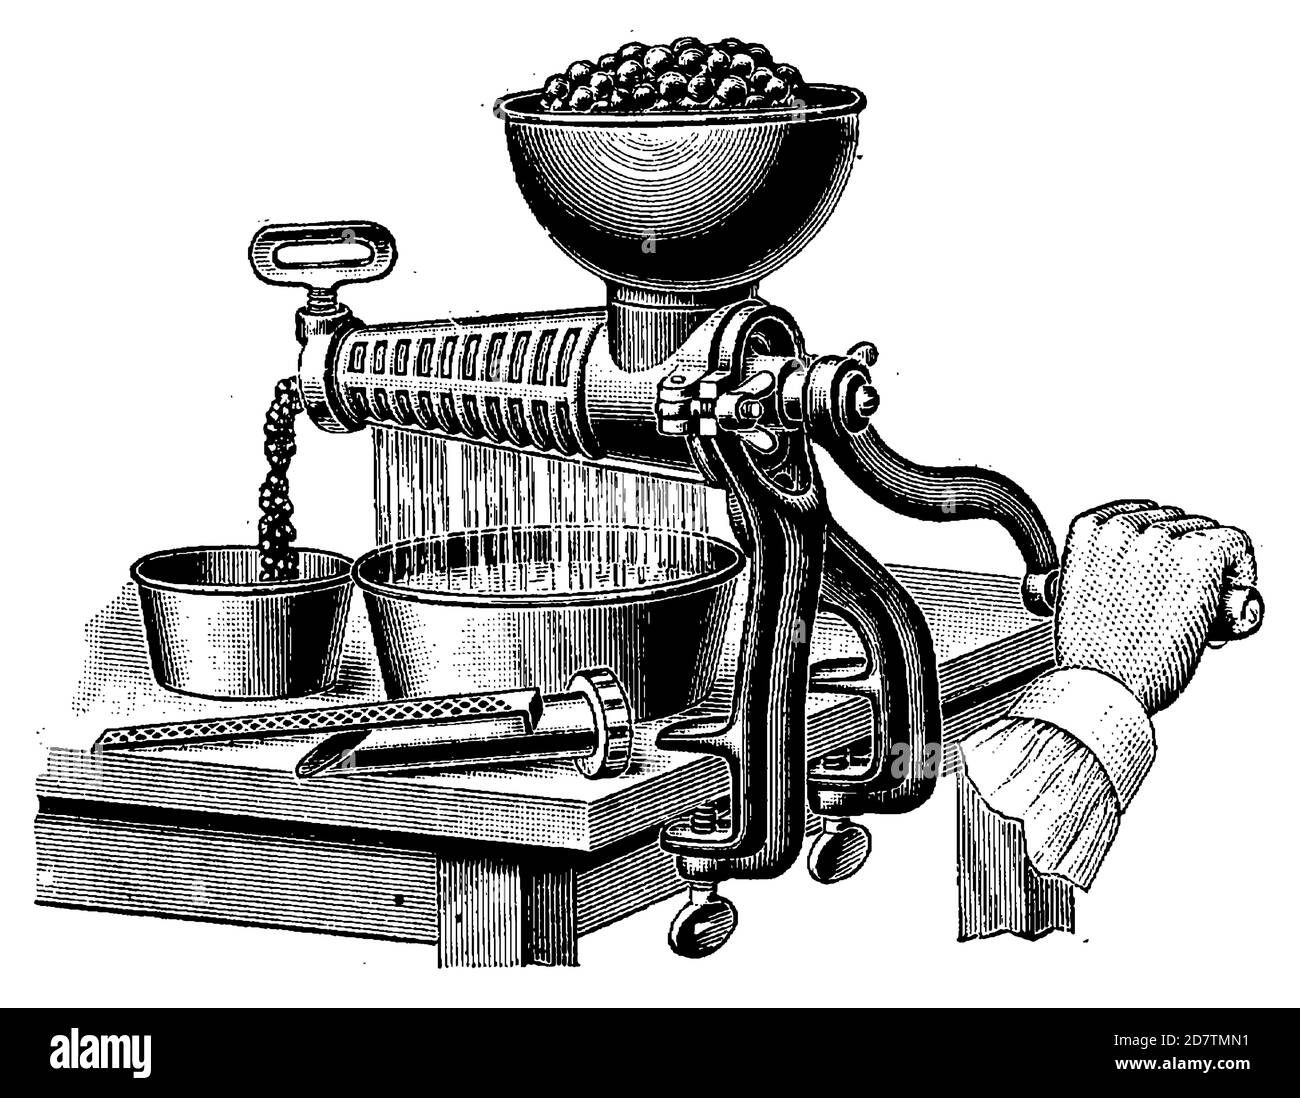 Old-style traditional fruit press for juice extraction. Kitchen utensil from 19th century. Stock Photo